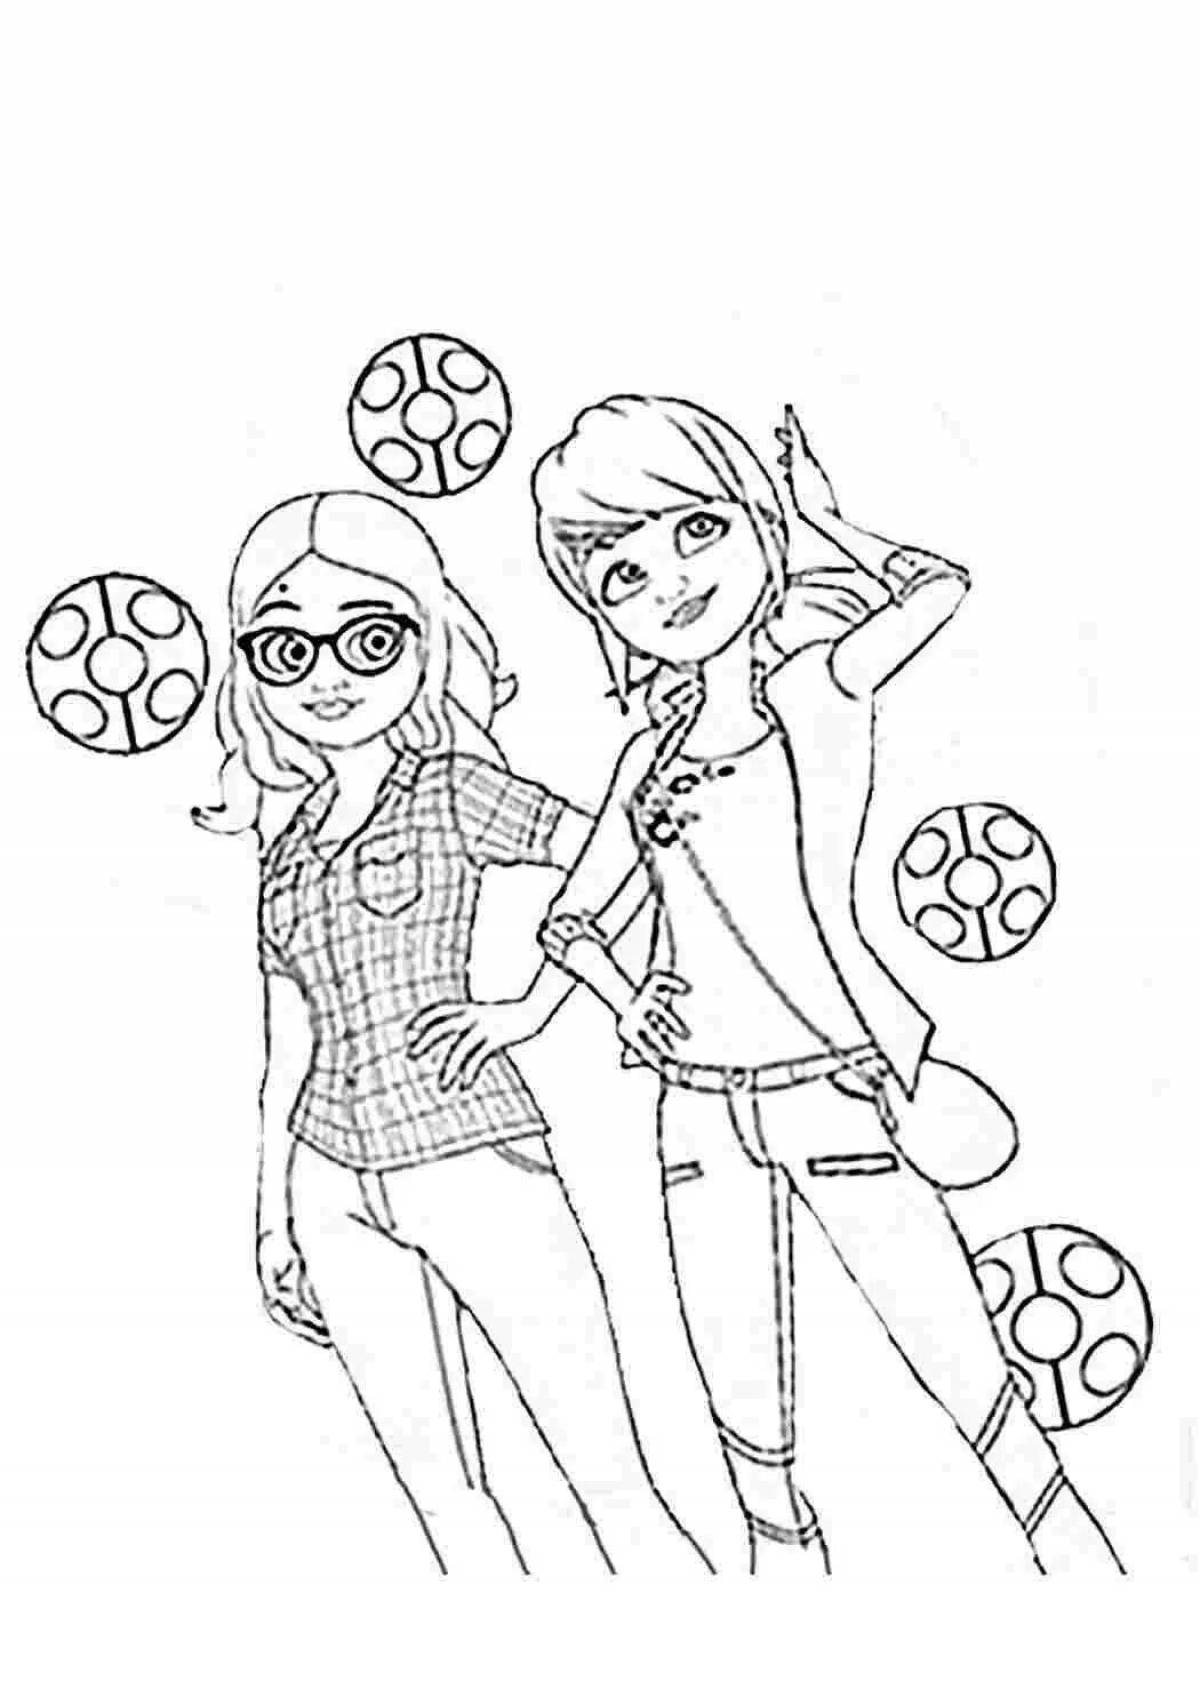 Colorful ladybug and marinette coloring book